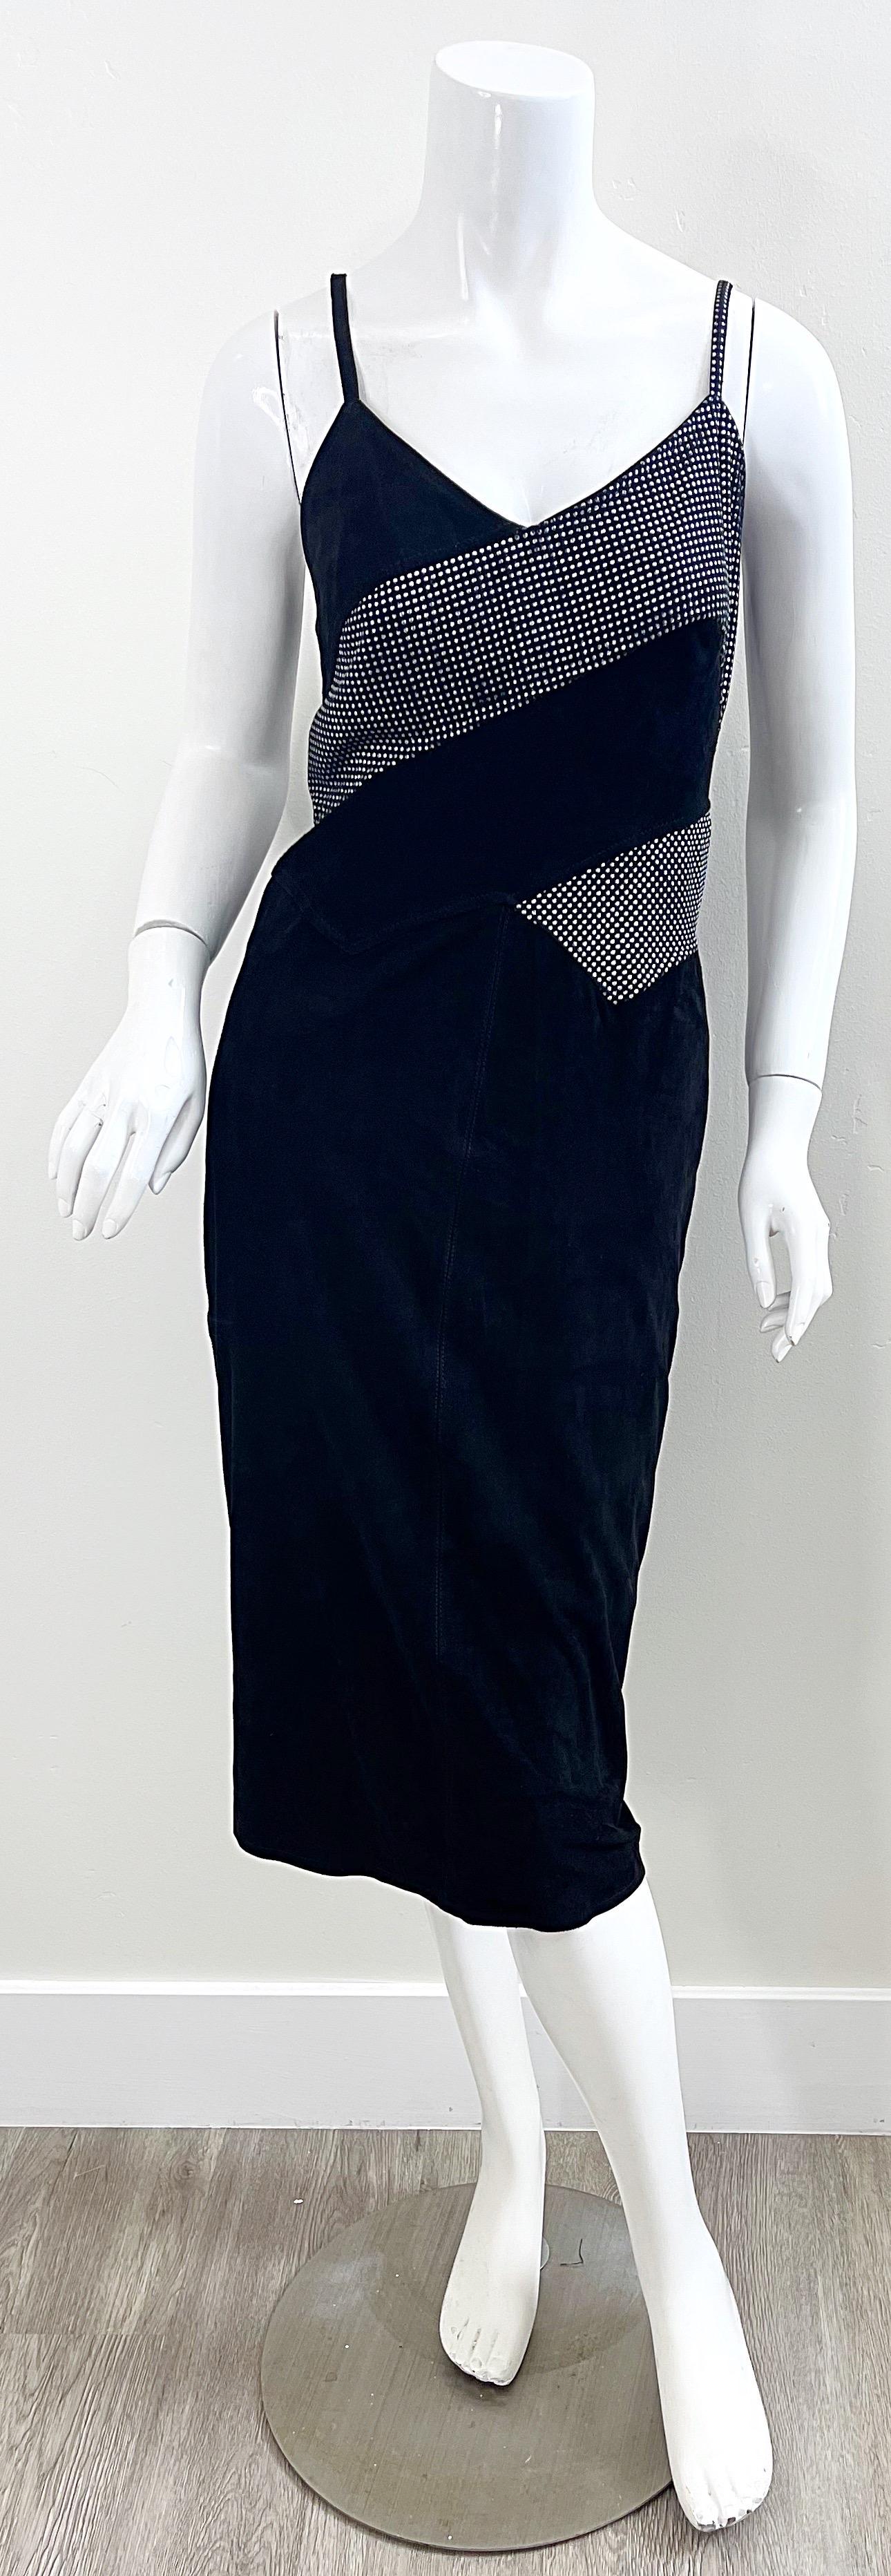 Fendi 1980s Fendissime Black Silver Suede Leather Vintage 80s Hand Painted Dress In Excellent Condition For Sale In San Diego, CA